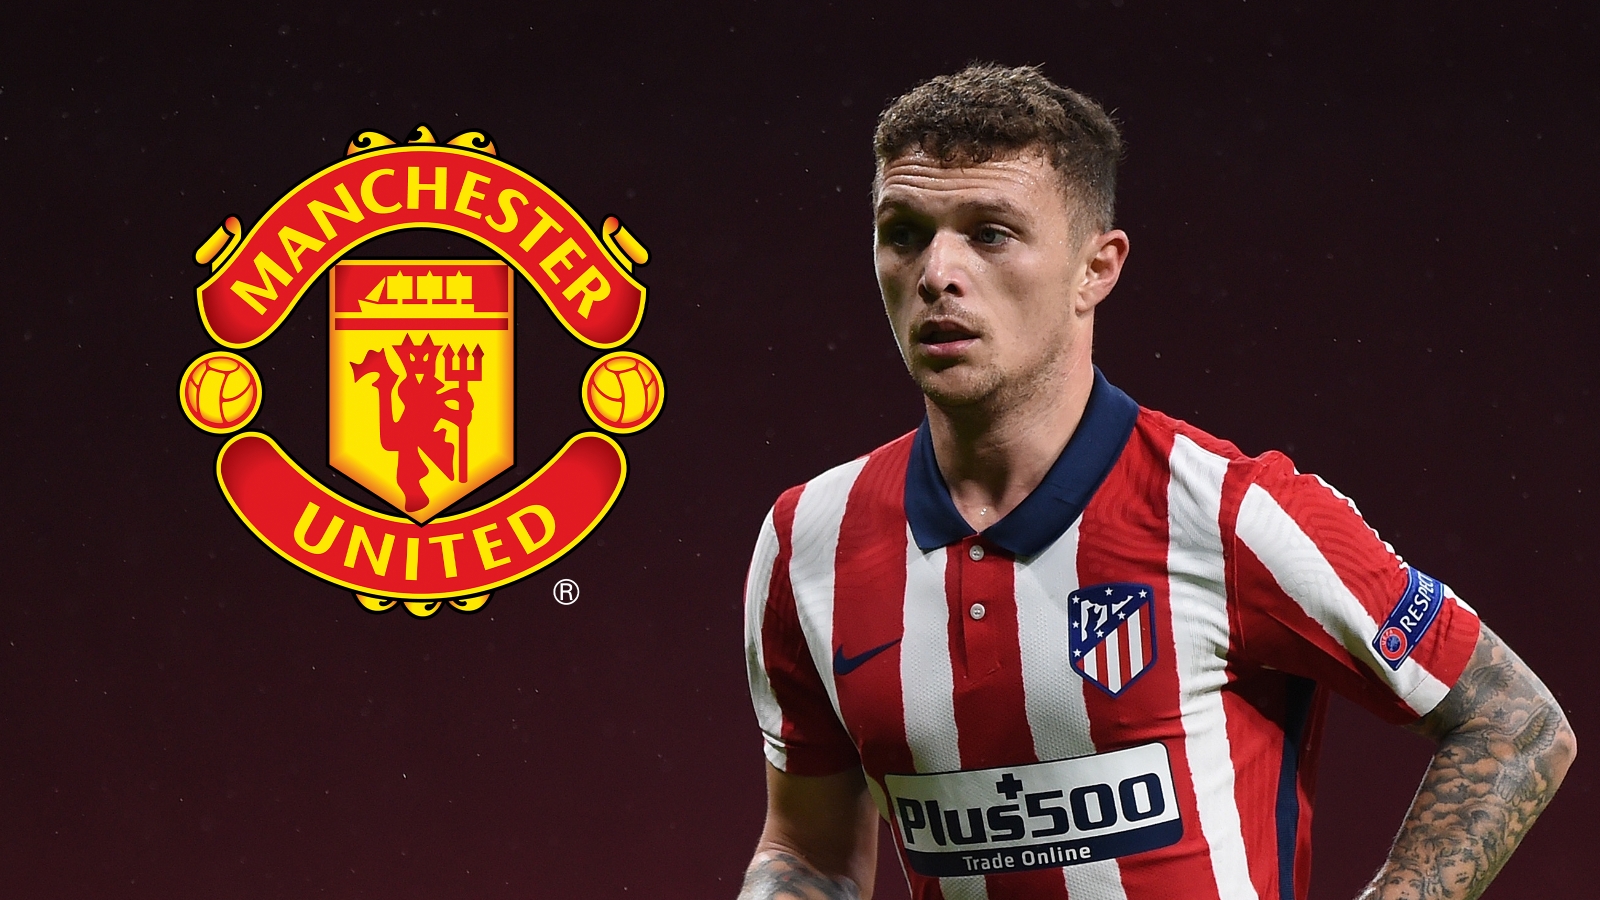 Transfer news and rumours LIVE: Atletico Madrid brace for Trippier exit to Man Utd